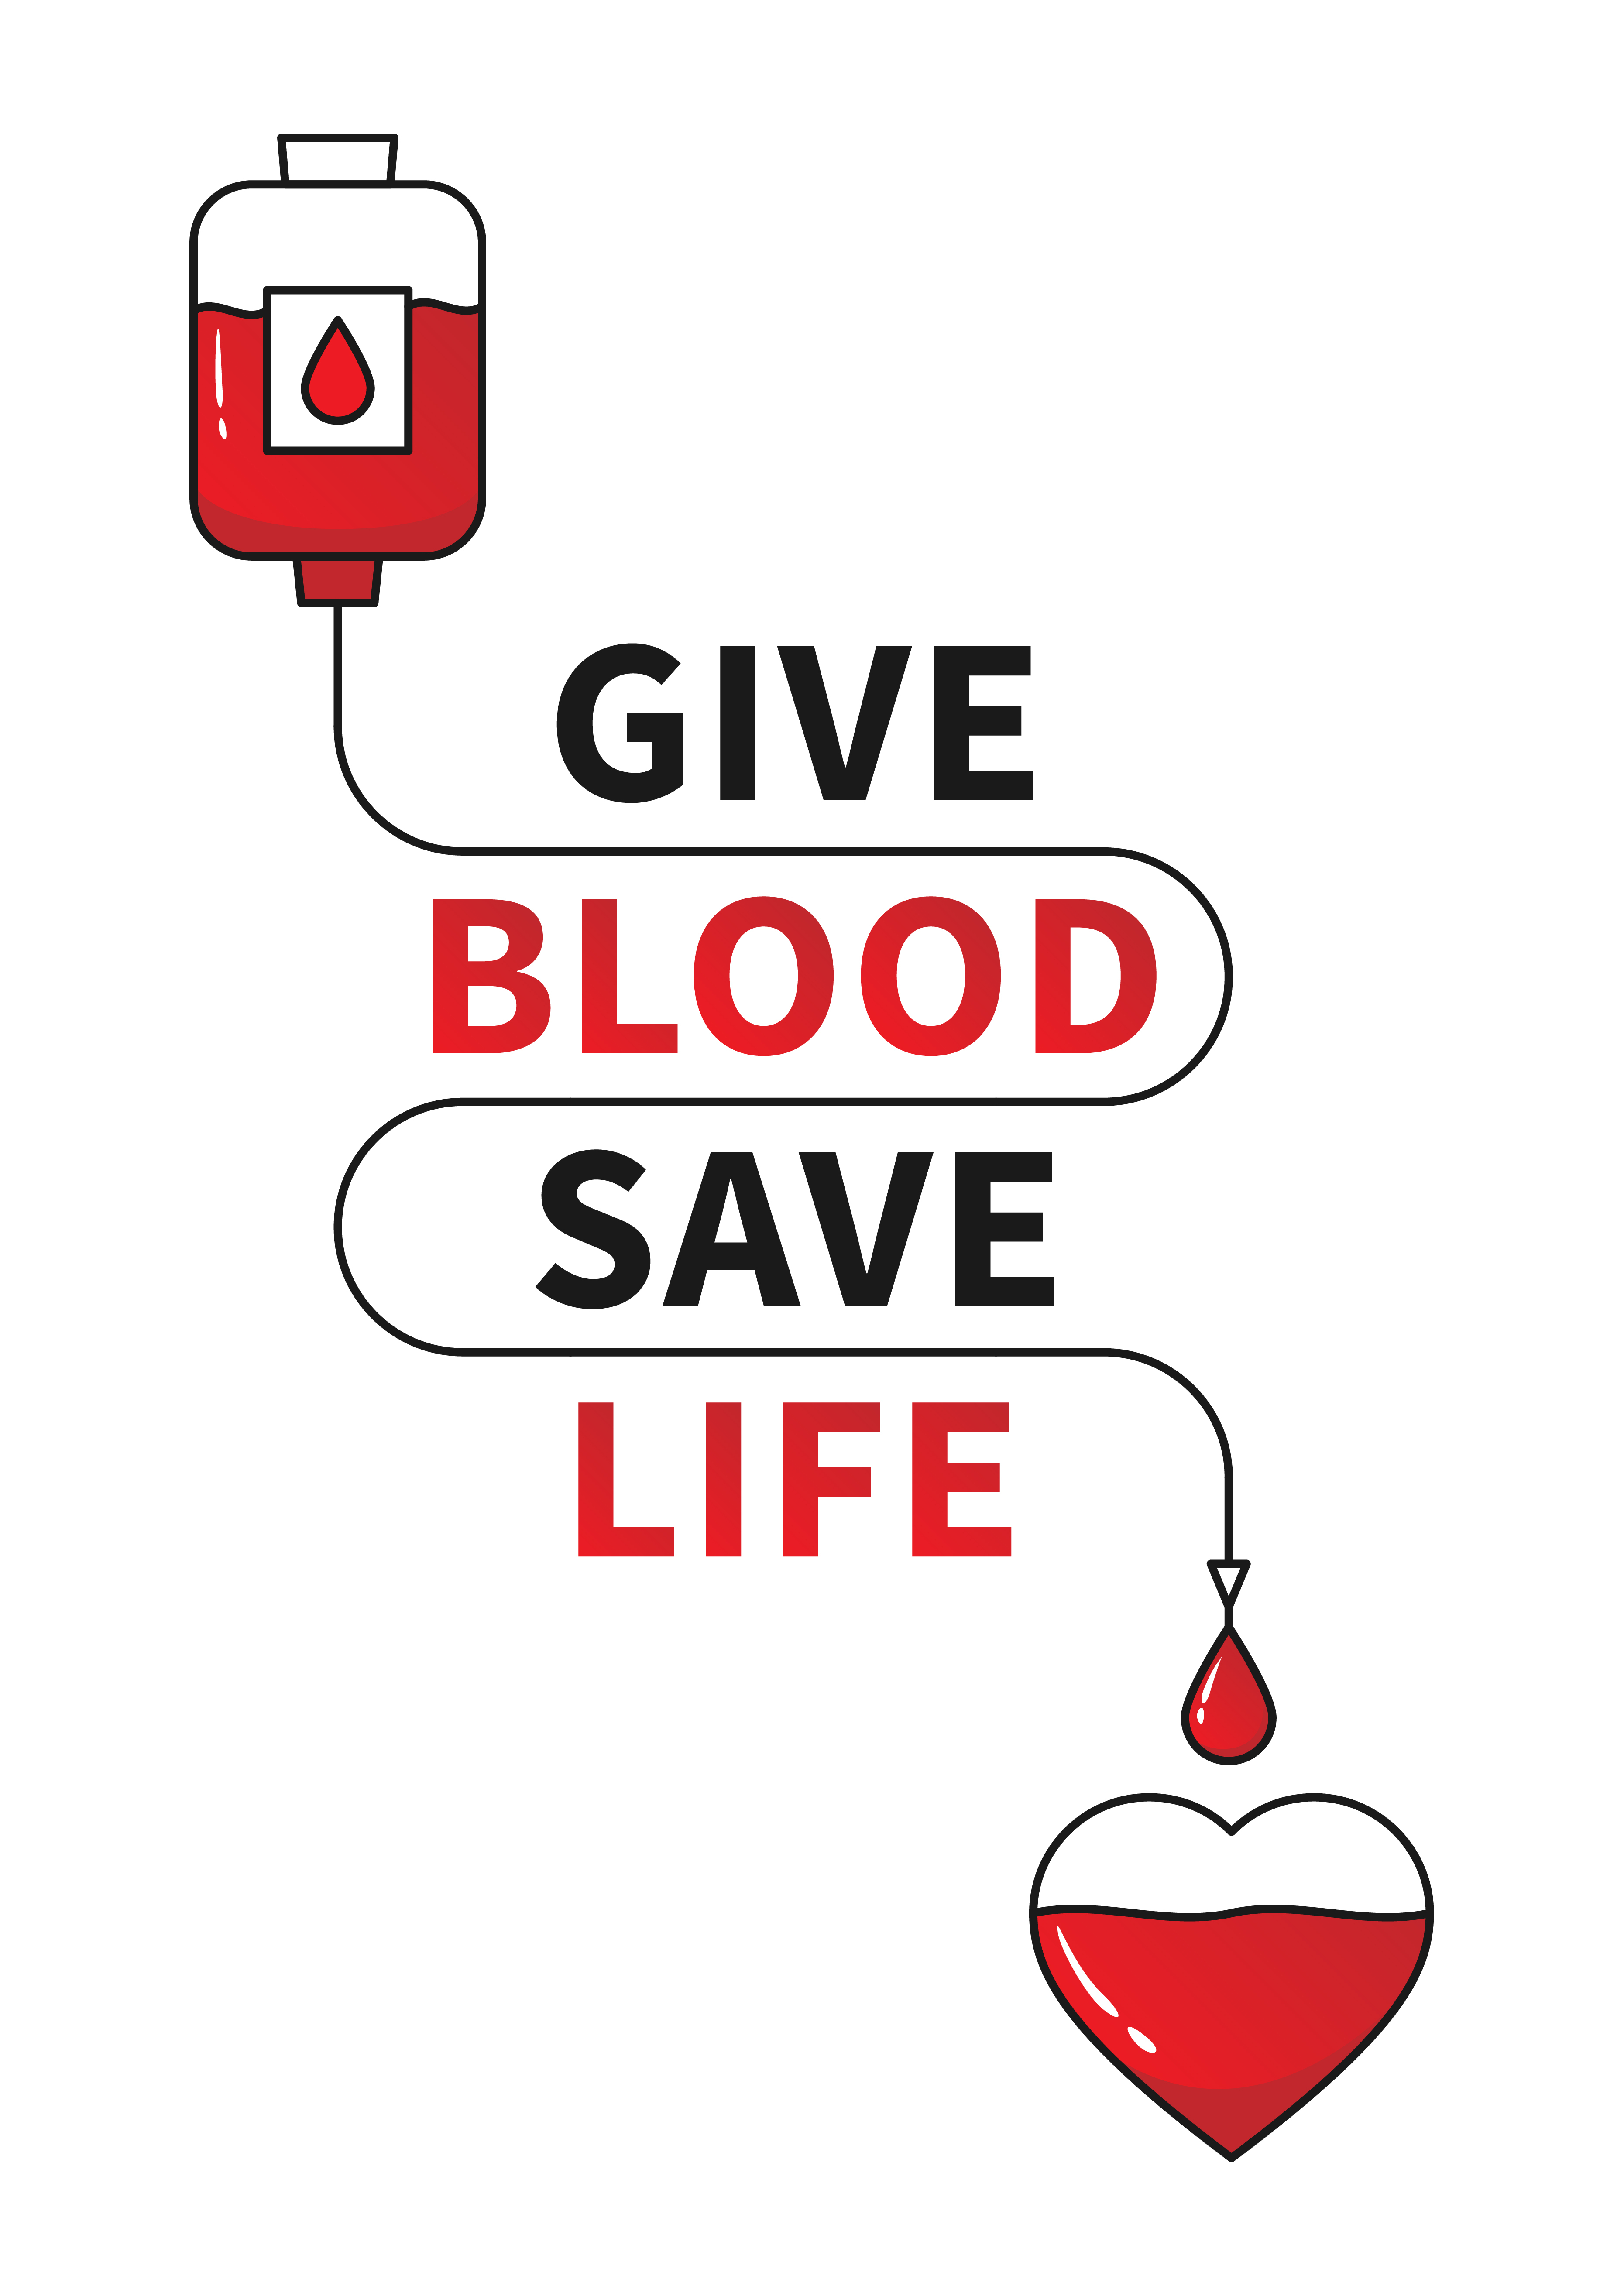 Blood donation is an beatufiul beneficence and we are highly encouraging to try even once if you only can!